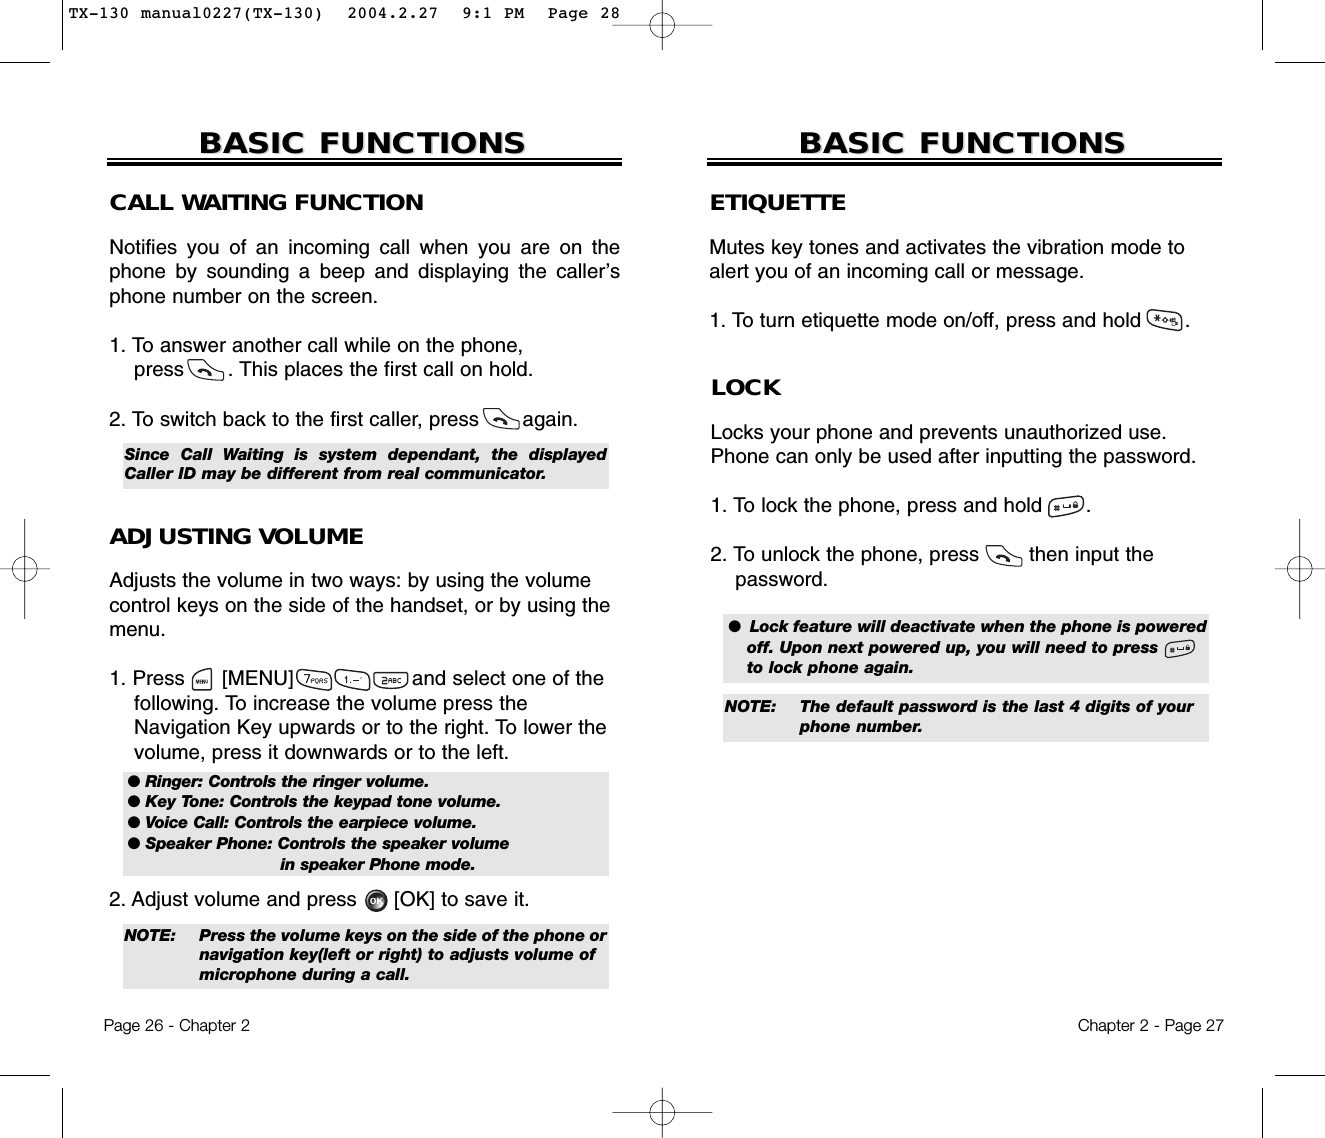 ETIQUETTEMutes key tones and activates the vibration mode toalert you of an incoming call or message.1. To turn etiquette mode on/off, press and hold       .Chapter 2 - Page 27BASIC FUNCTIONSBASIC FUNCTIONSPage 26 - Chapter 2BASIC FUNCTIONSBASIC FUNCTIONSCALL WAITING FUNCTIONNotifies you of an incoming call when you are on thephone by sounding a beep and displaying the caller’sphone number on the screen.1. To answer another call while on the phone, press       . This places the first call on hold. 2. To switch back to the first caller, press       again.ADJUSTING VOLUMEAdjusts the volume in two ways: by using the volumecontrol keys on the side of the handset, or by using themenu.1. Press      [MENU]                   and select one of the following. To increase the volume press the Navigation Key upwards or to the right. To lower the   volume, press it downwards or to the left.2. Adjust volume and press      [OK] to save it.● Ringer: Controls the ringer volume.● Key Tone: Controls the keypad tone volume.● Voice Call: Controls the earpiece volume.● Speaker Phone: Controls the speaker volume in speaker Phone mode.Since Call Waiting is system dependant, the displayedCaller ID may be different from real communicator.LOCKLocks your phone and prevents unauthorized use.Phone can only be used after inputting the password.1. To lock the phone, press and hold       .2. To unlock the phone, press        then input thepassword.●  Lock feature will deactivate when the phone is poweredoff. Upon next powered up, you will need to press      to lock phone again.NOTE: The default password is the last 4 digits of your phone number.NOTE: Press the volume keys on the side of the phone ornavigation key(left or right) to adjusts volume of microphone during a call.TX-130 manual0227(TX-130)  2004.2.27  9:1 PM  Page 28